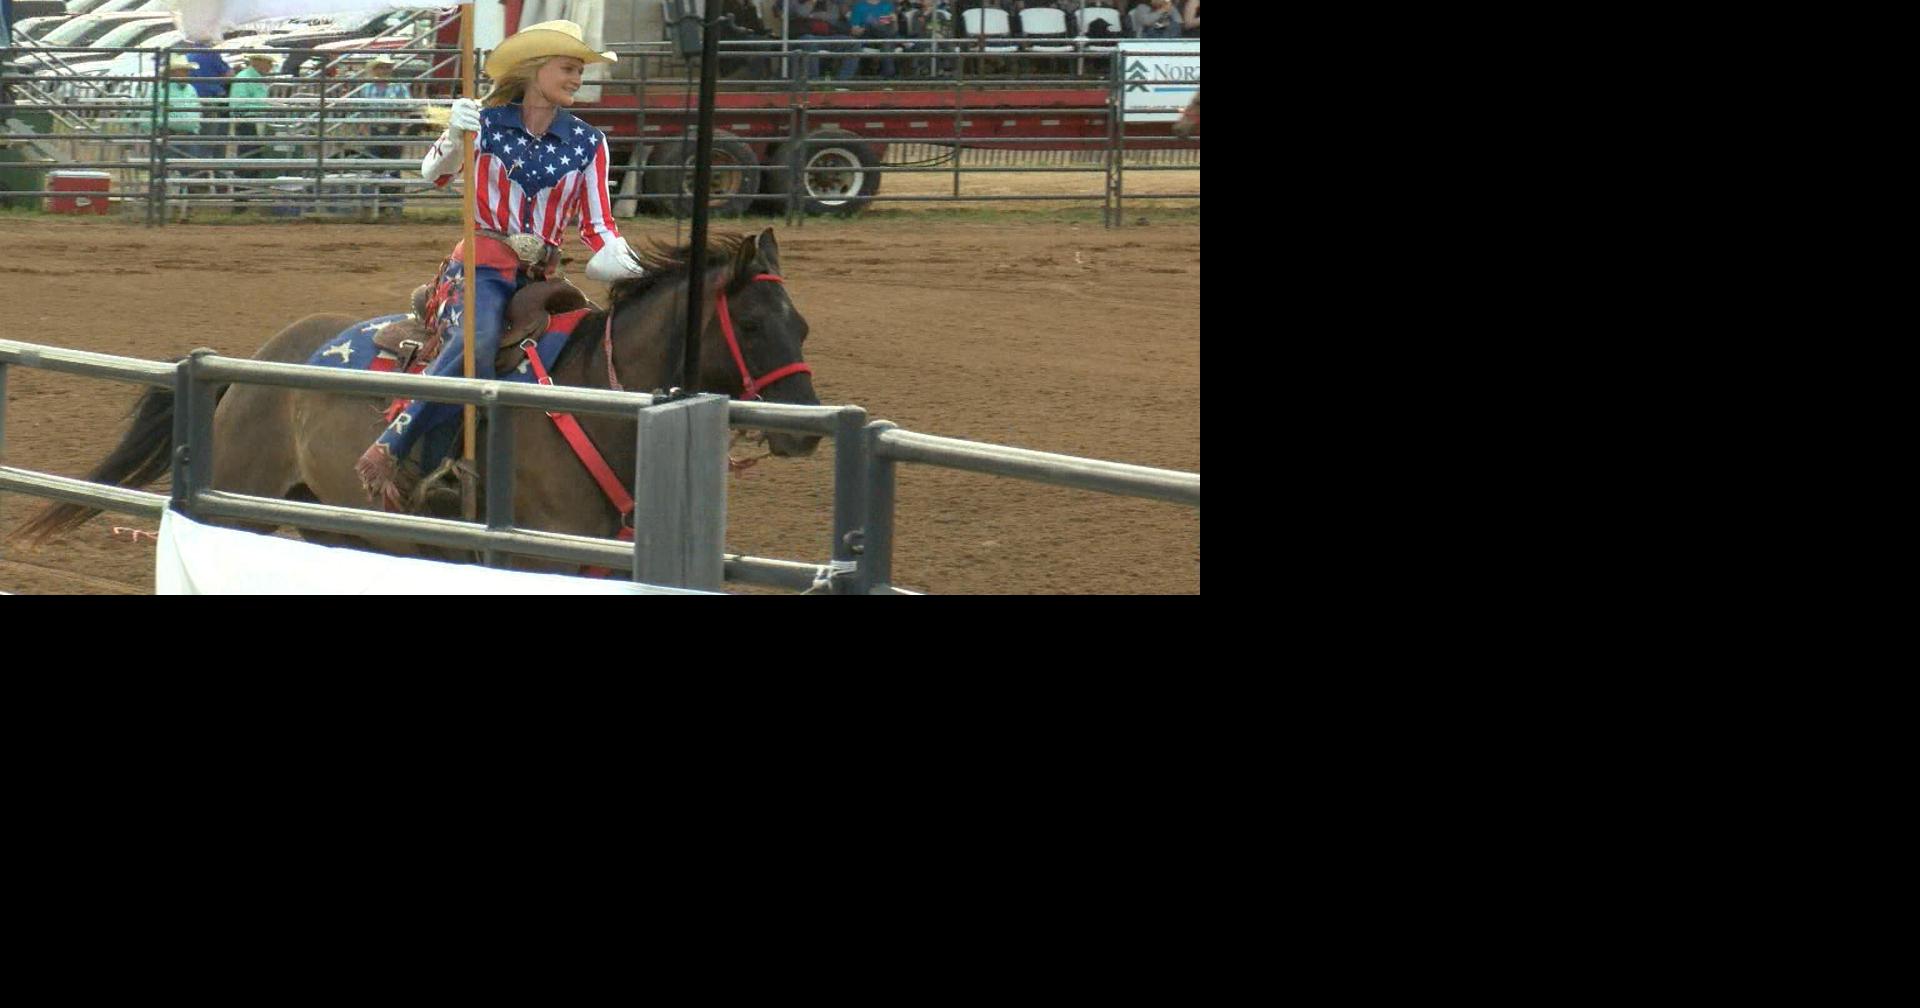 Merrill rodeo returns for 33rd ride Top Stories